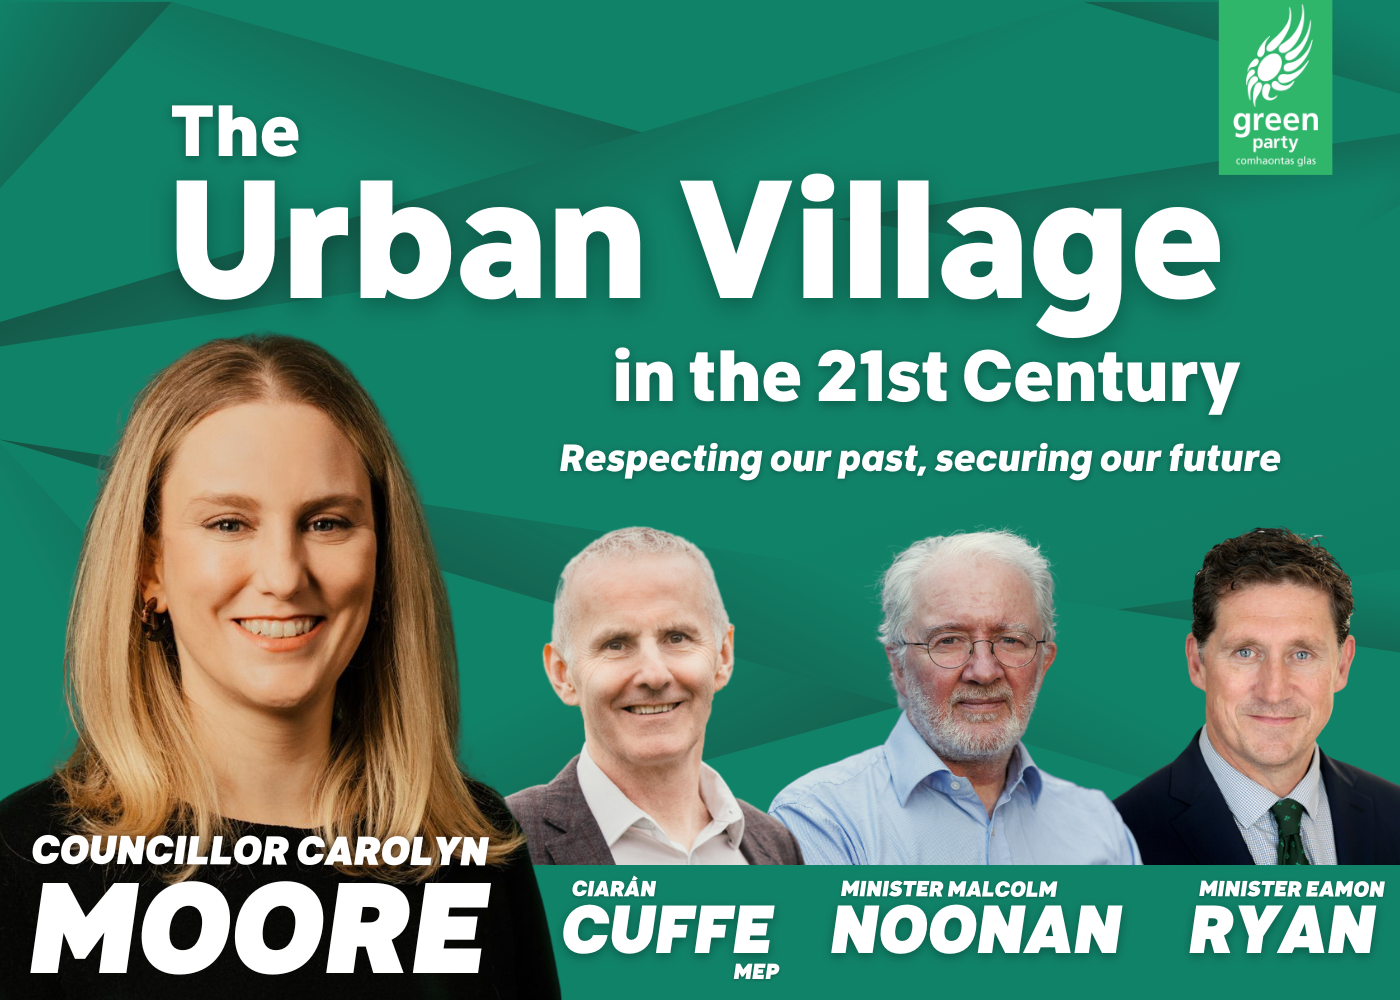 Public Meeting: The Urban Village in the 21st Century